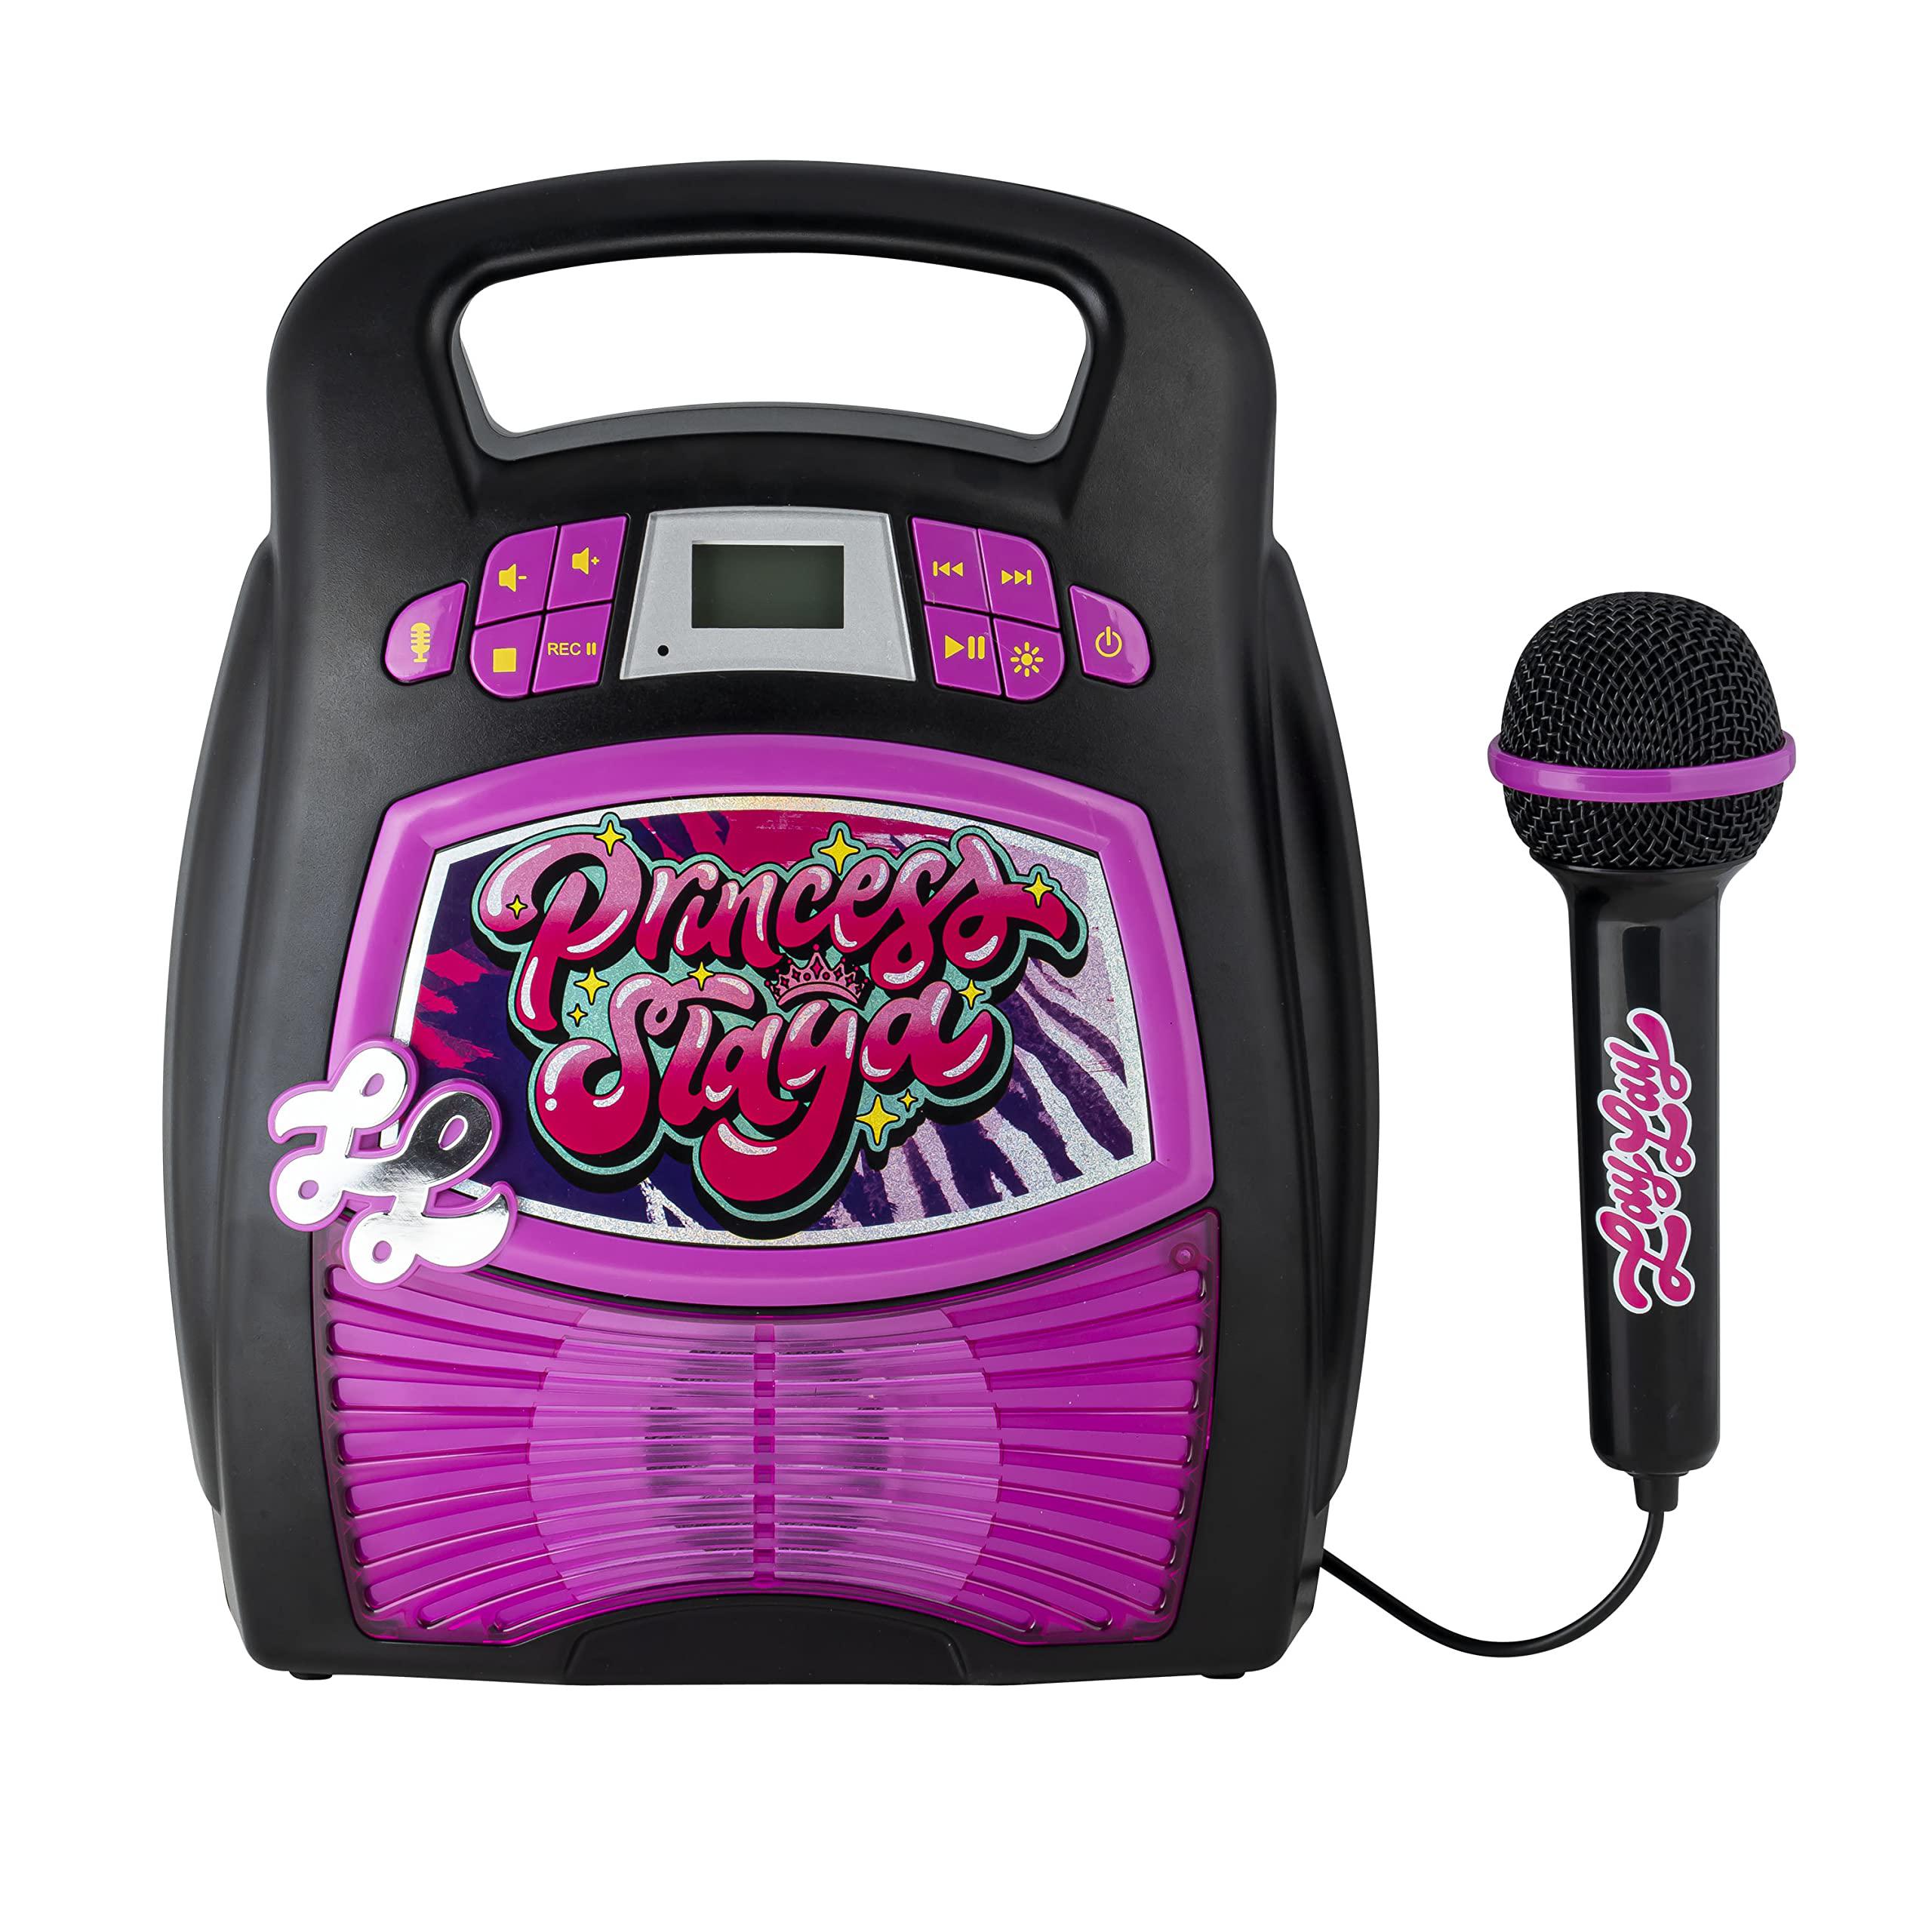 ekids that girl lay lay karaoke machine for kids, bluetooth speaker with microphone and karaoke recorder to save and share pe